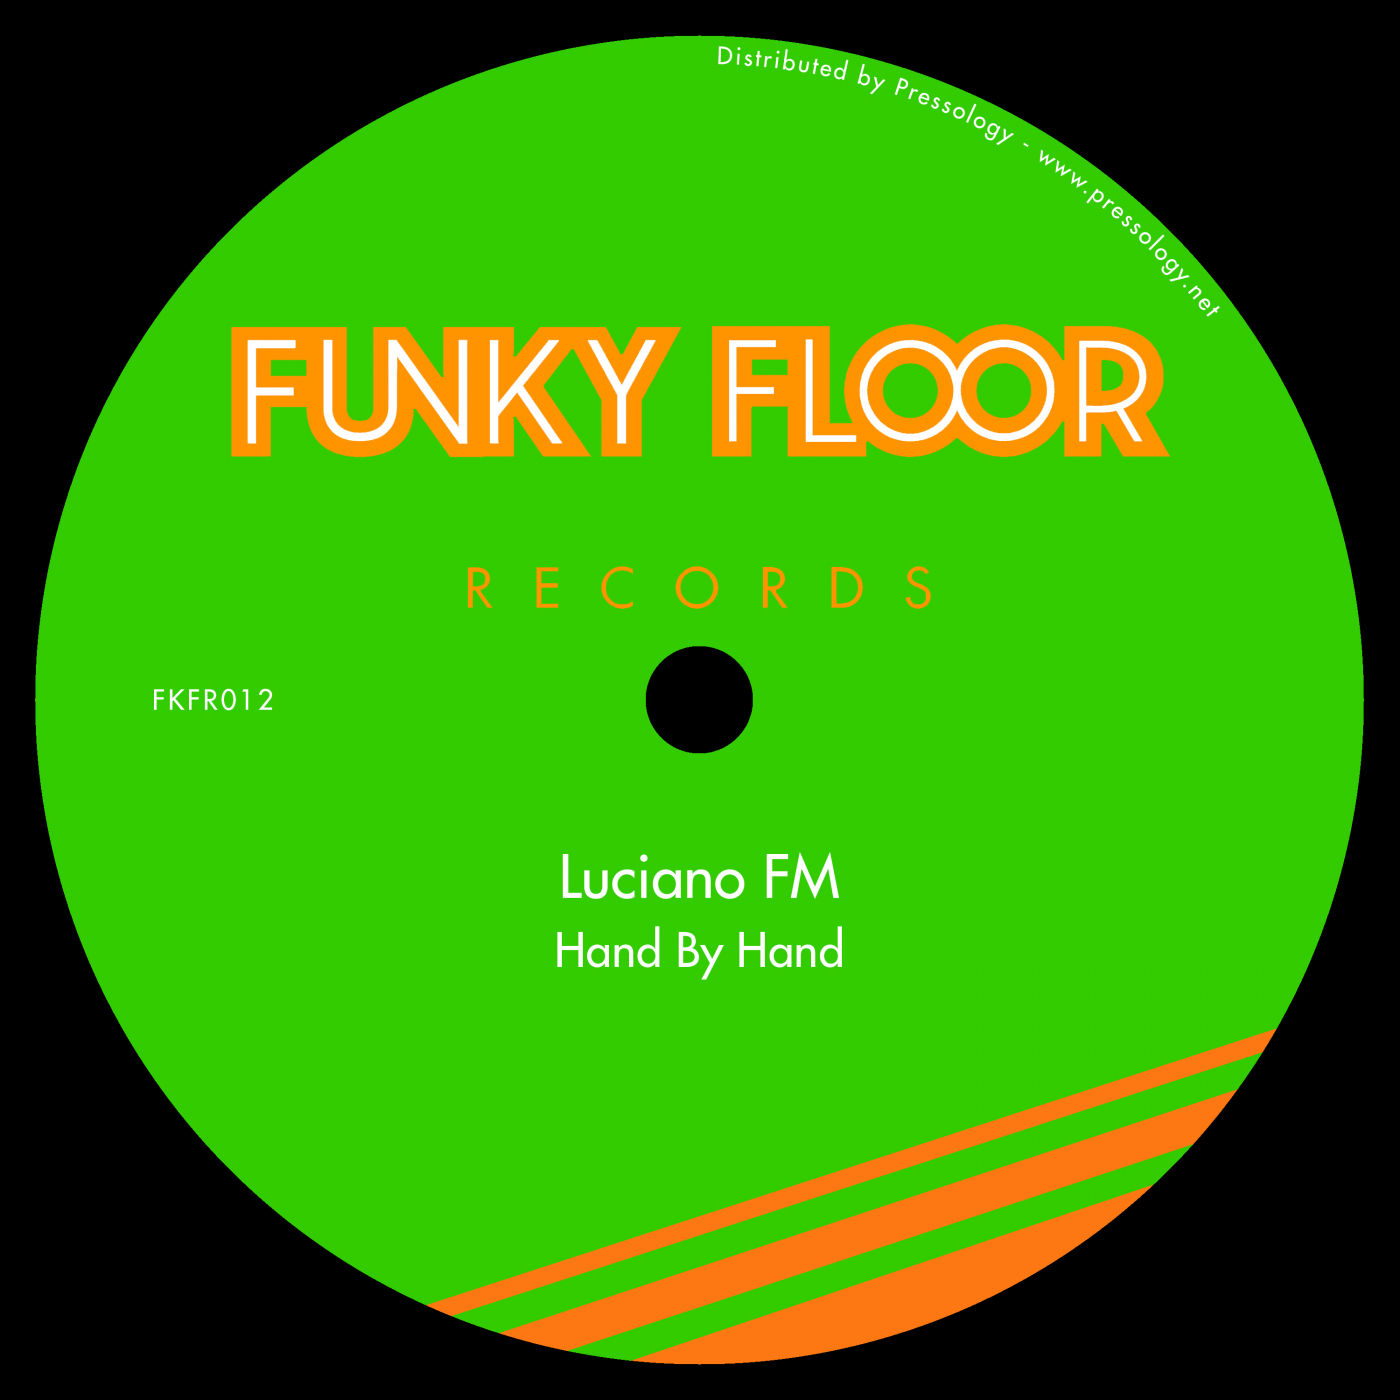 Luciano FM - Hand By Hand / Funky Floor Records